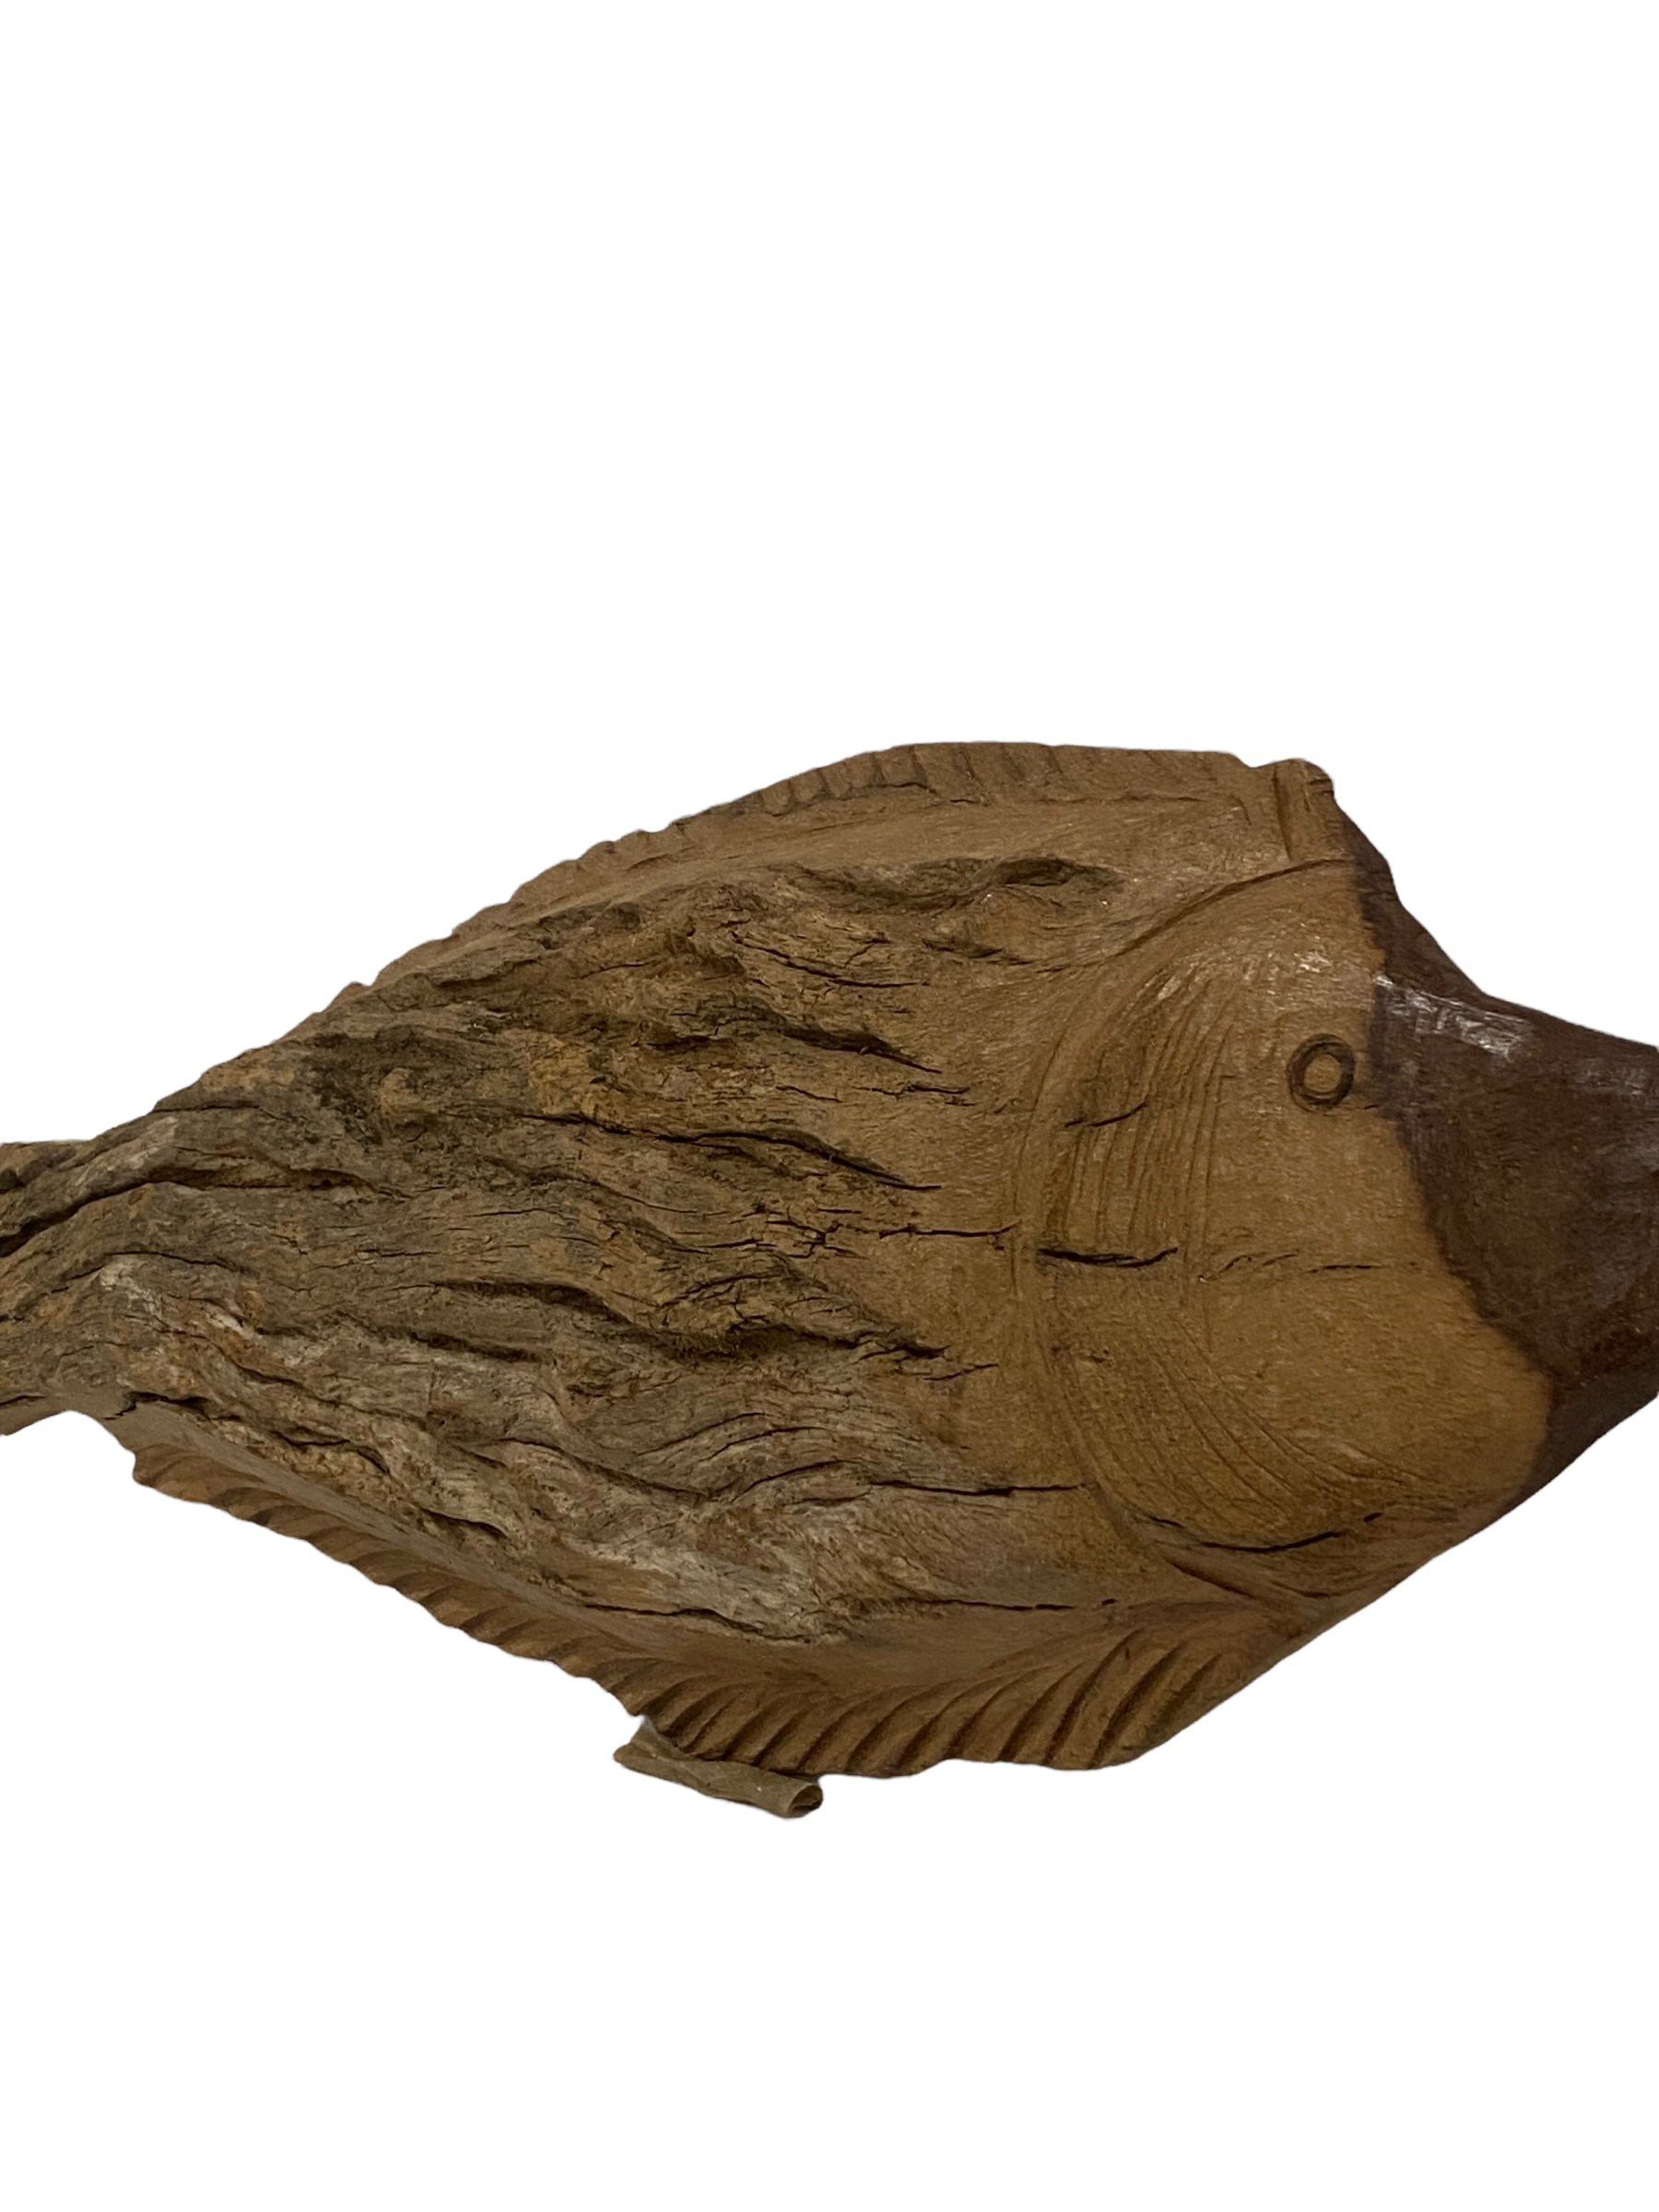 Driftwood Hand Carved Fish - (13.3) Large